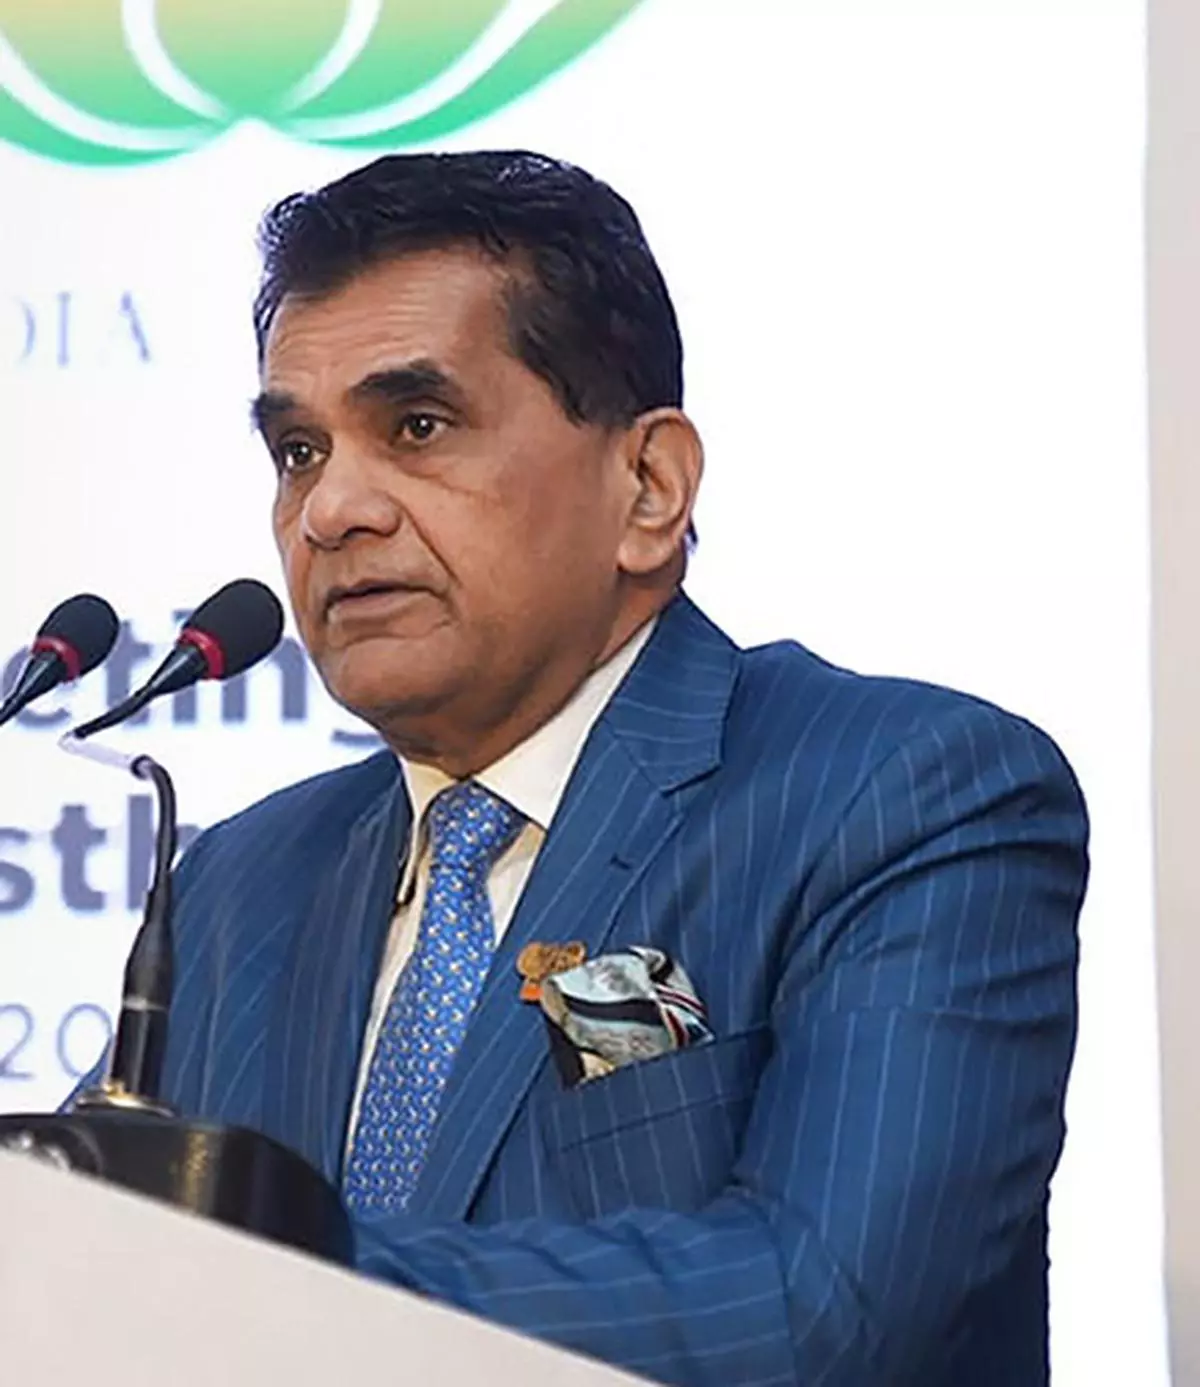 India’s G-20 Sherpa Amitabh Kant speaks at the first G20 Sherpa meeting, in Udaipur